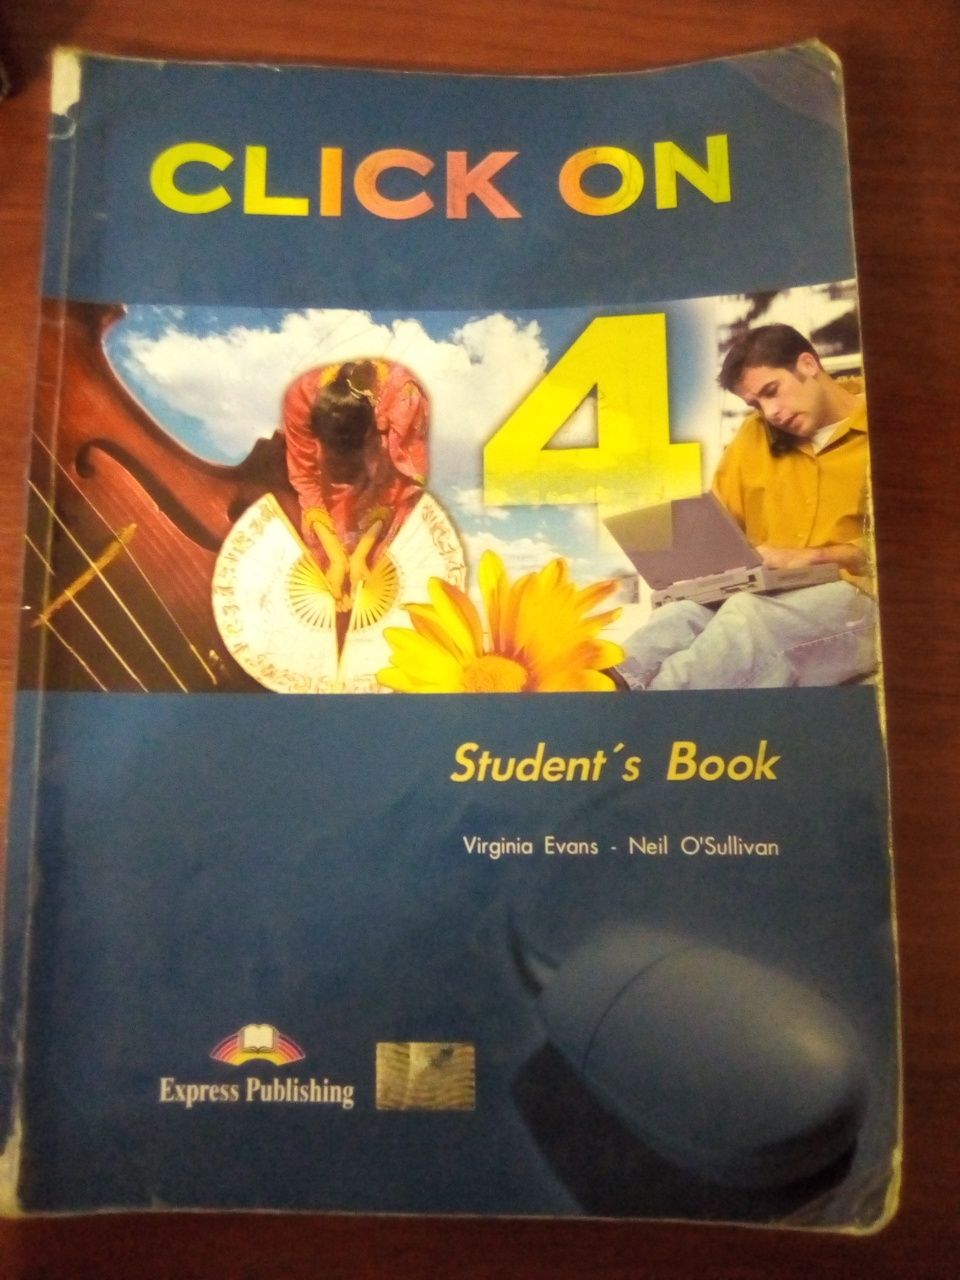 Student's book and workbook